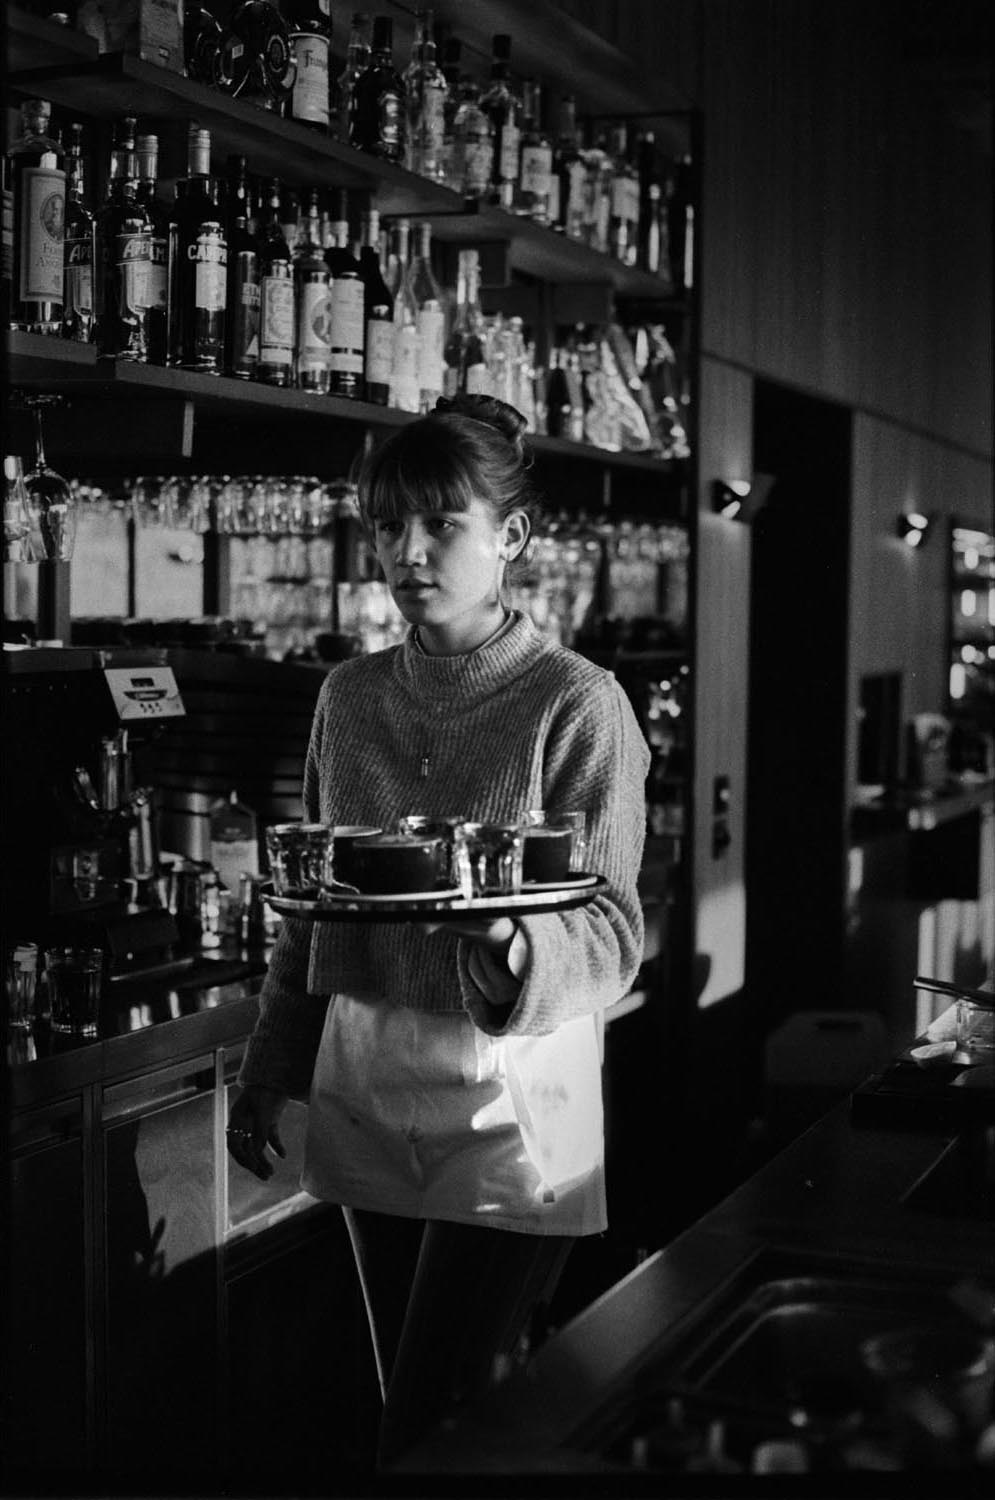 A woman working in Campo bar Zurich